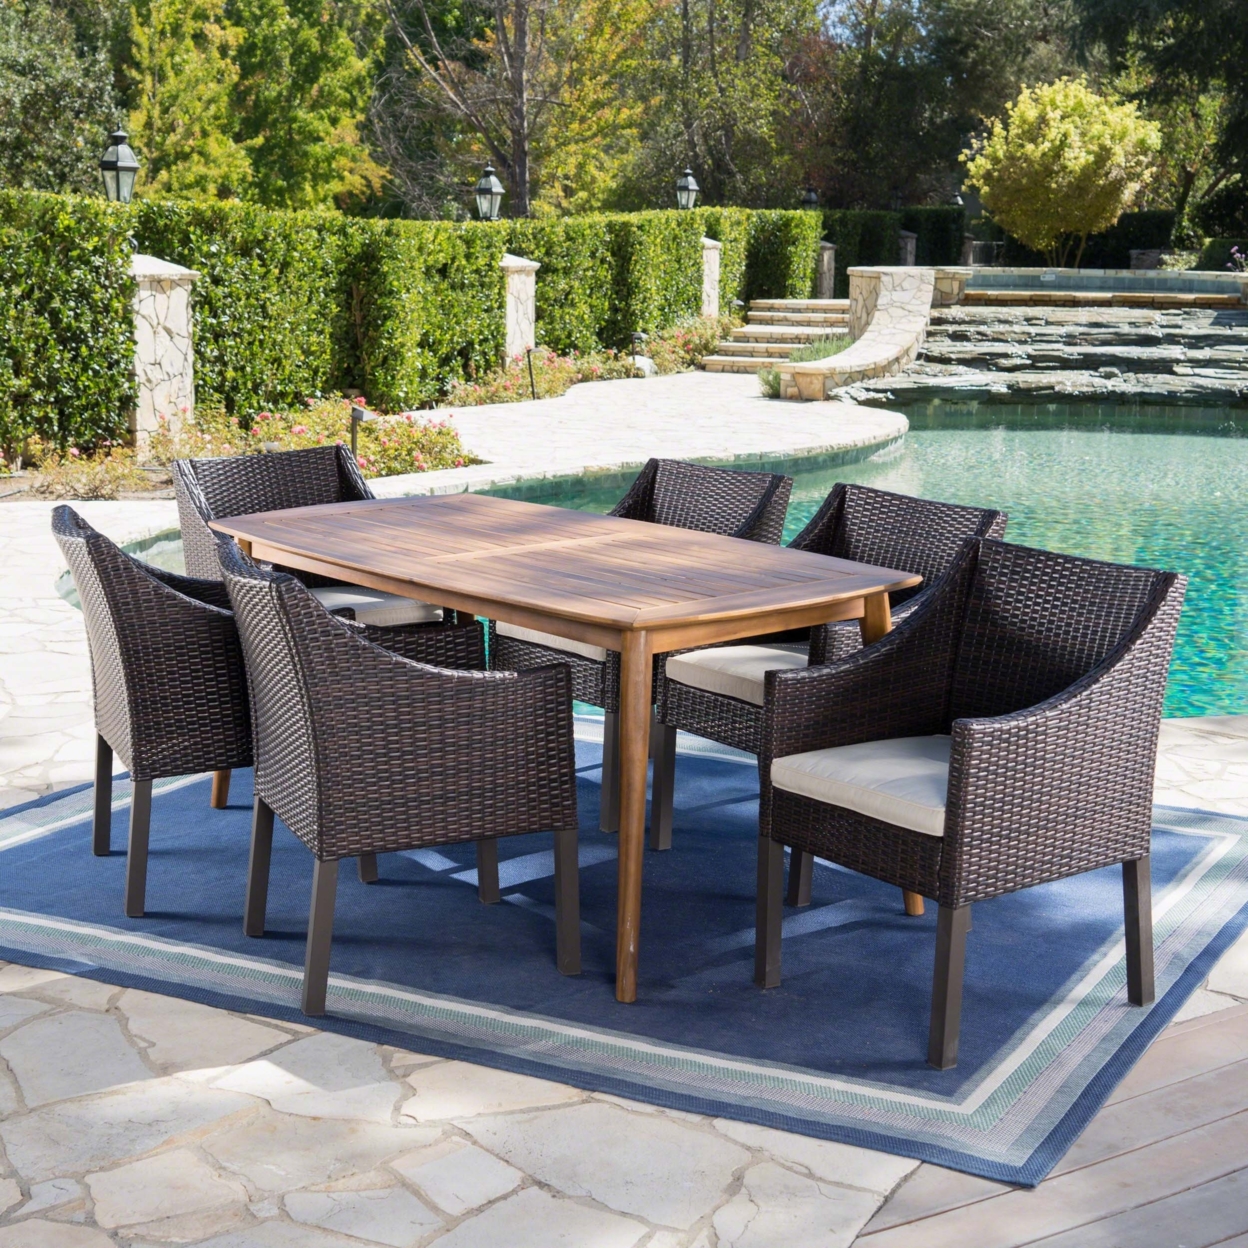 Allen Outdoor 7 Piece Wicker Dining Set With Teak Finished Acacia Wood Table